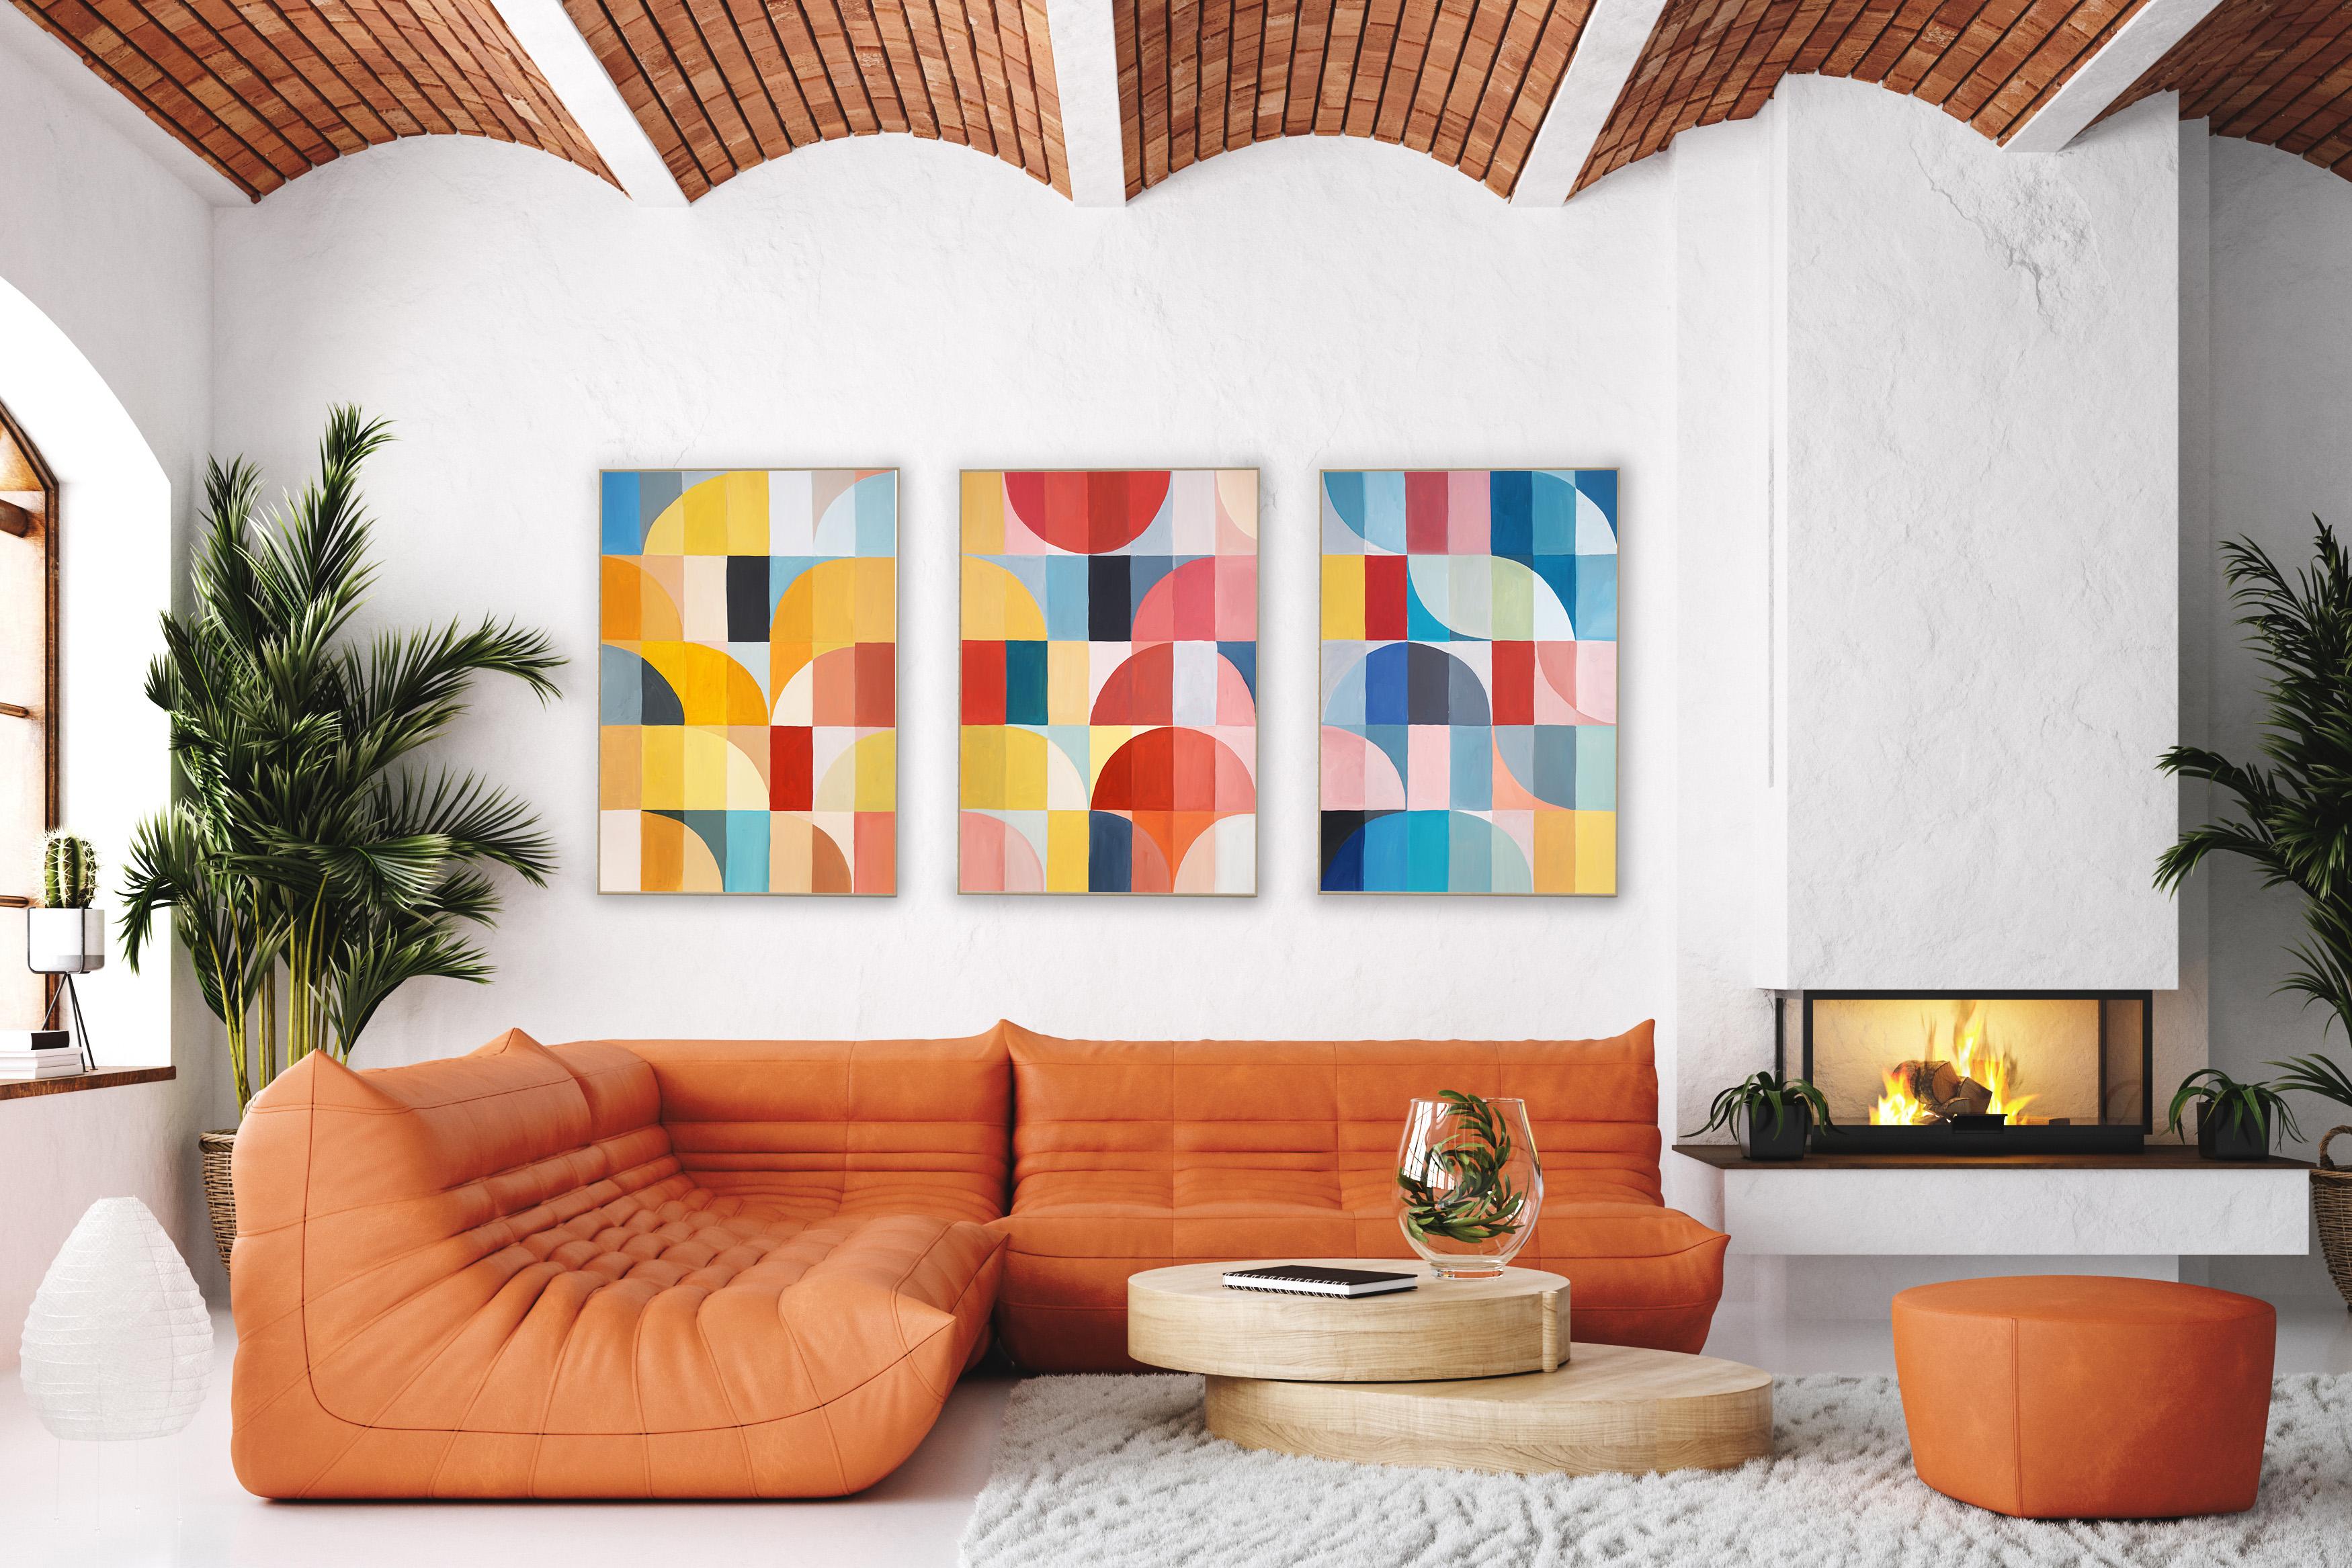 Primary Tones Arcs & Curves, Yellow, Blue and Red Bauhaus Grid, Large Triptych - Painting by Natalia Roman